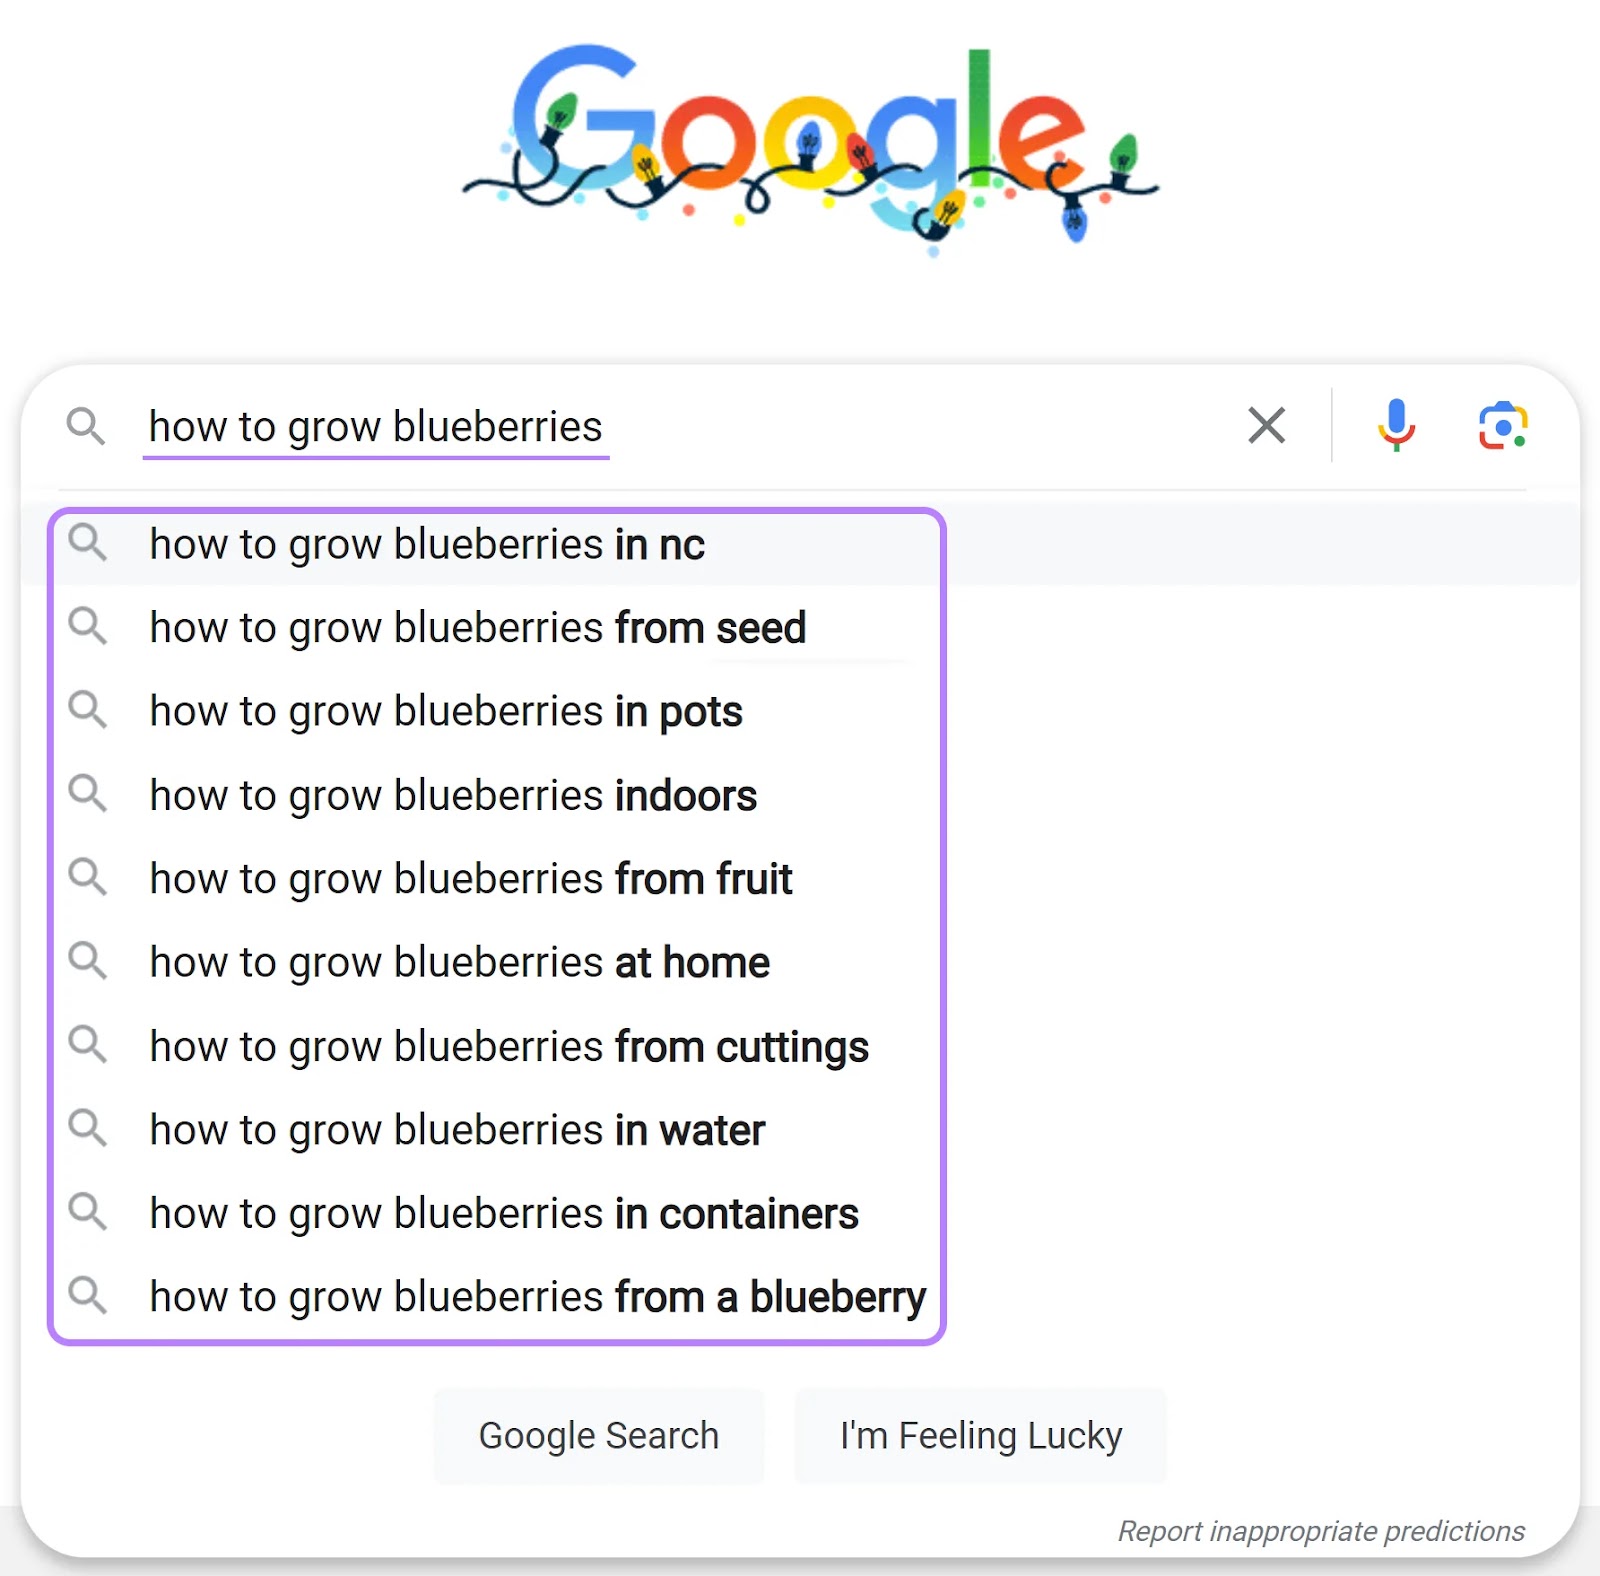 Google autocomplete suggestions when typing "how to grow blueberries" in search